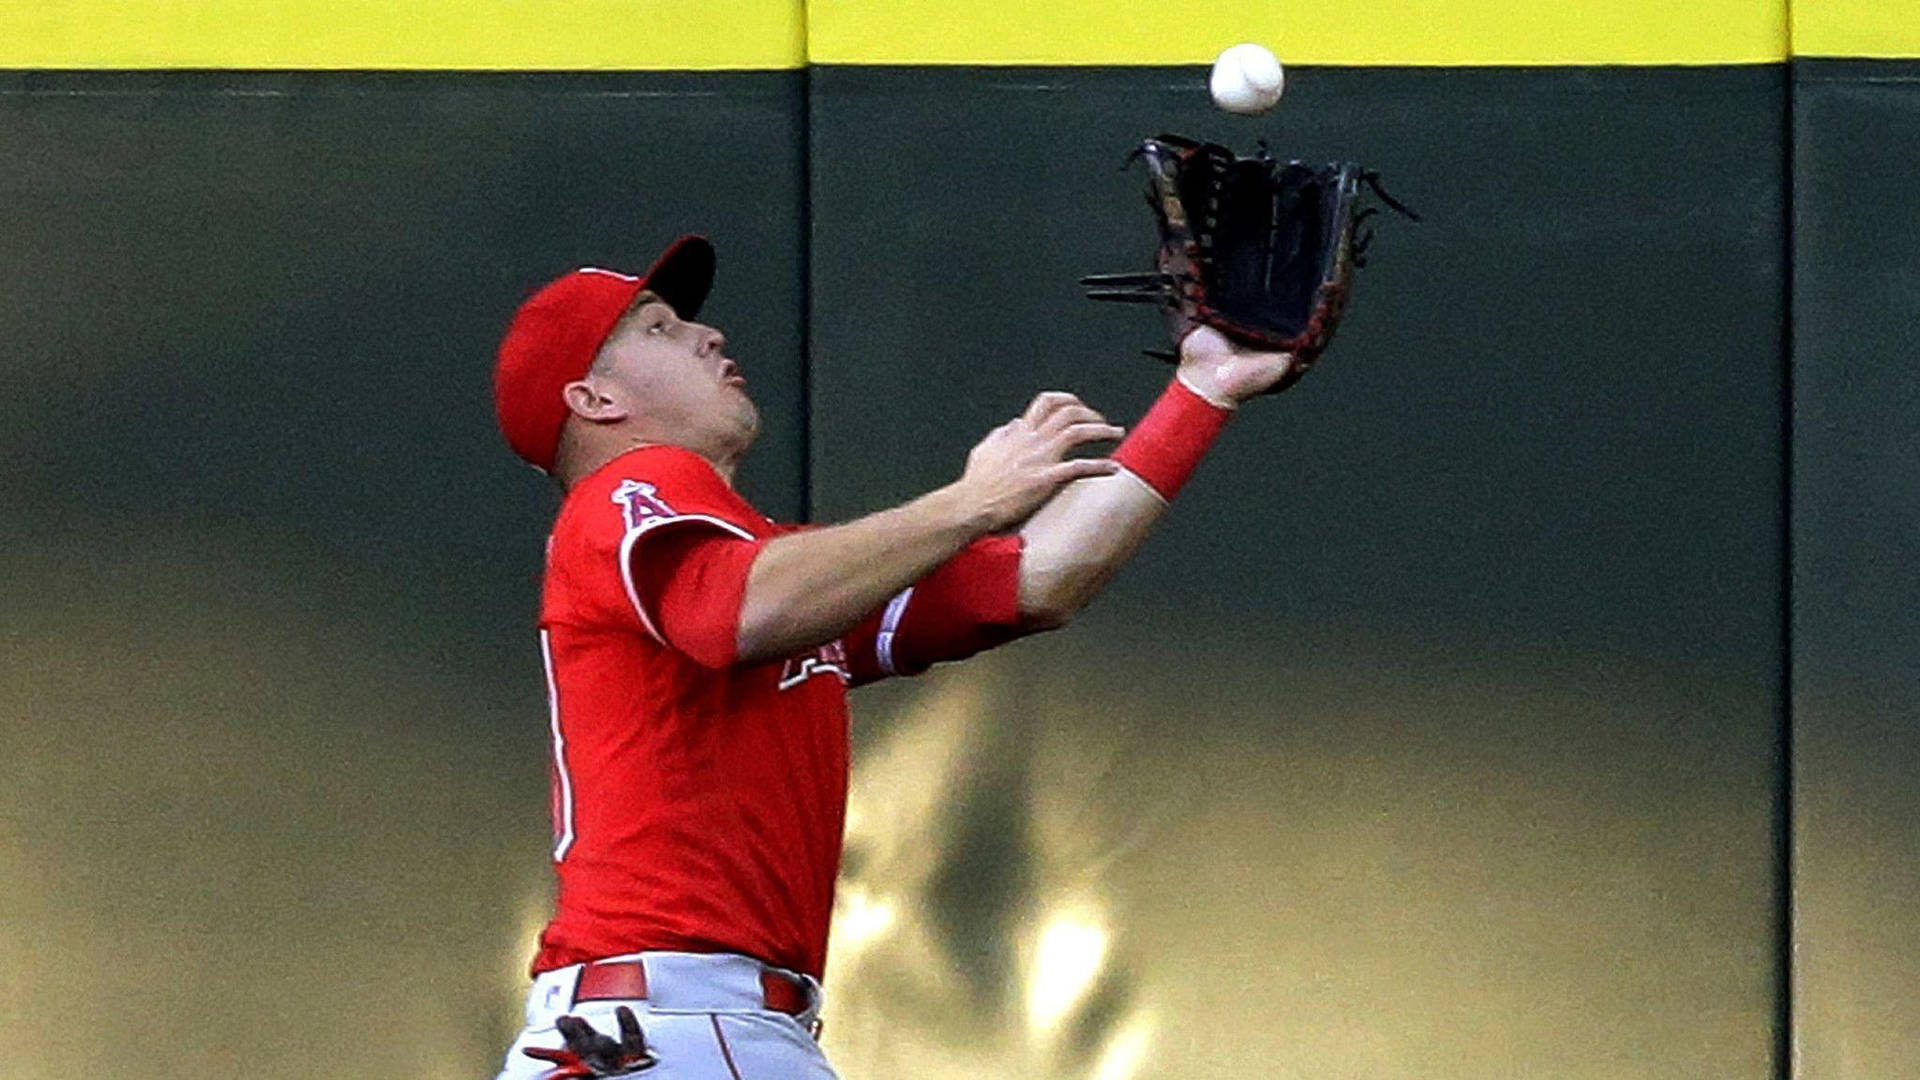 Mike Trout Catching The Ball Wallpaper